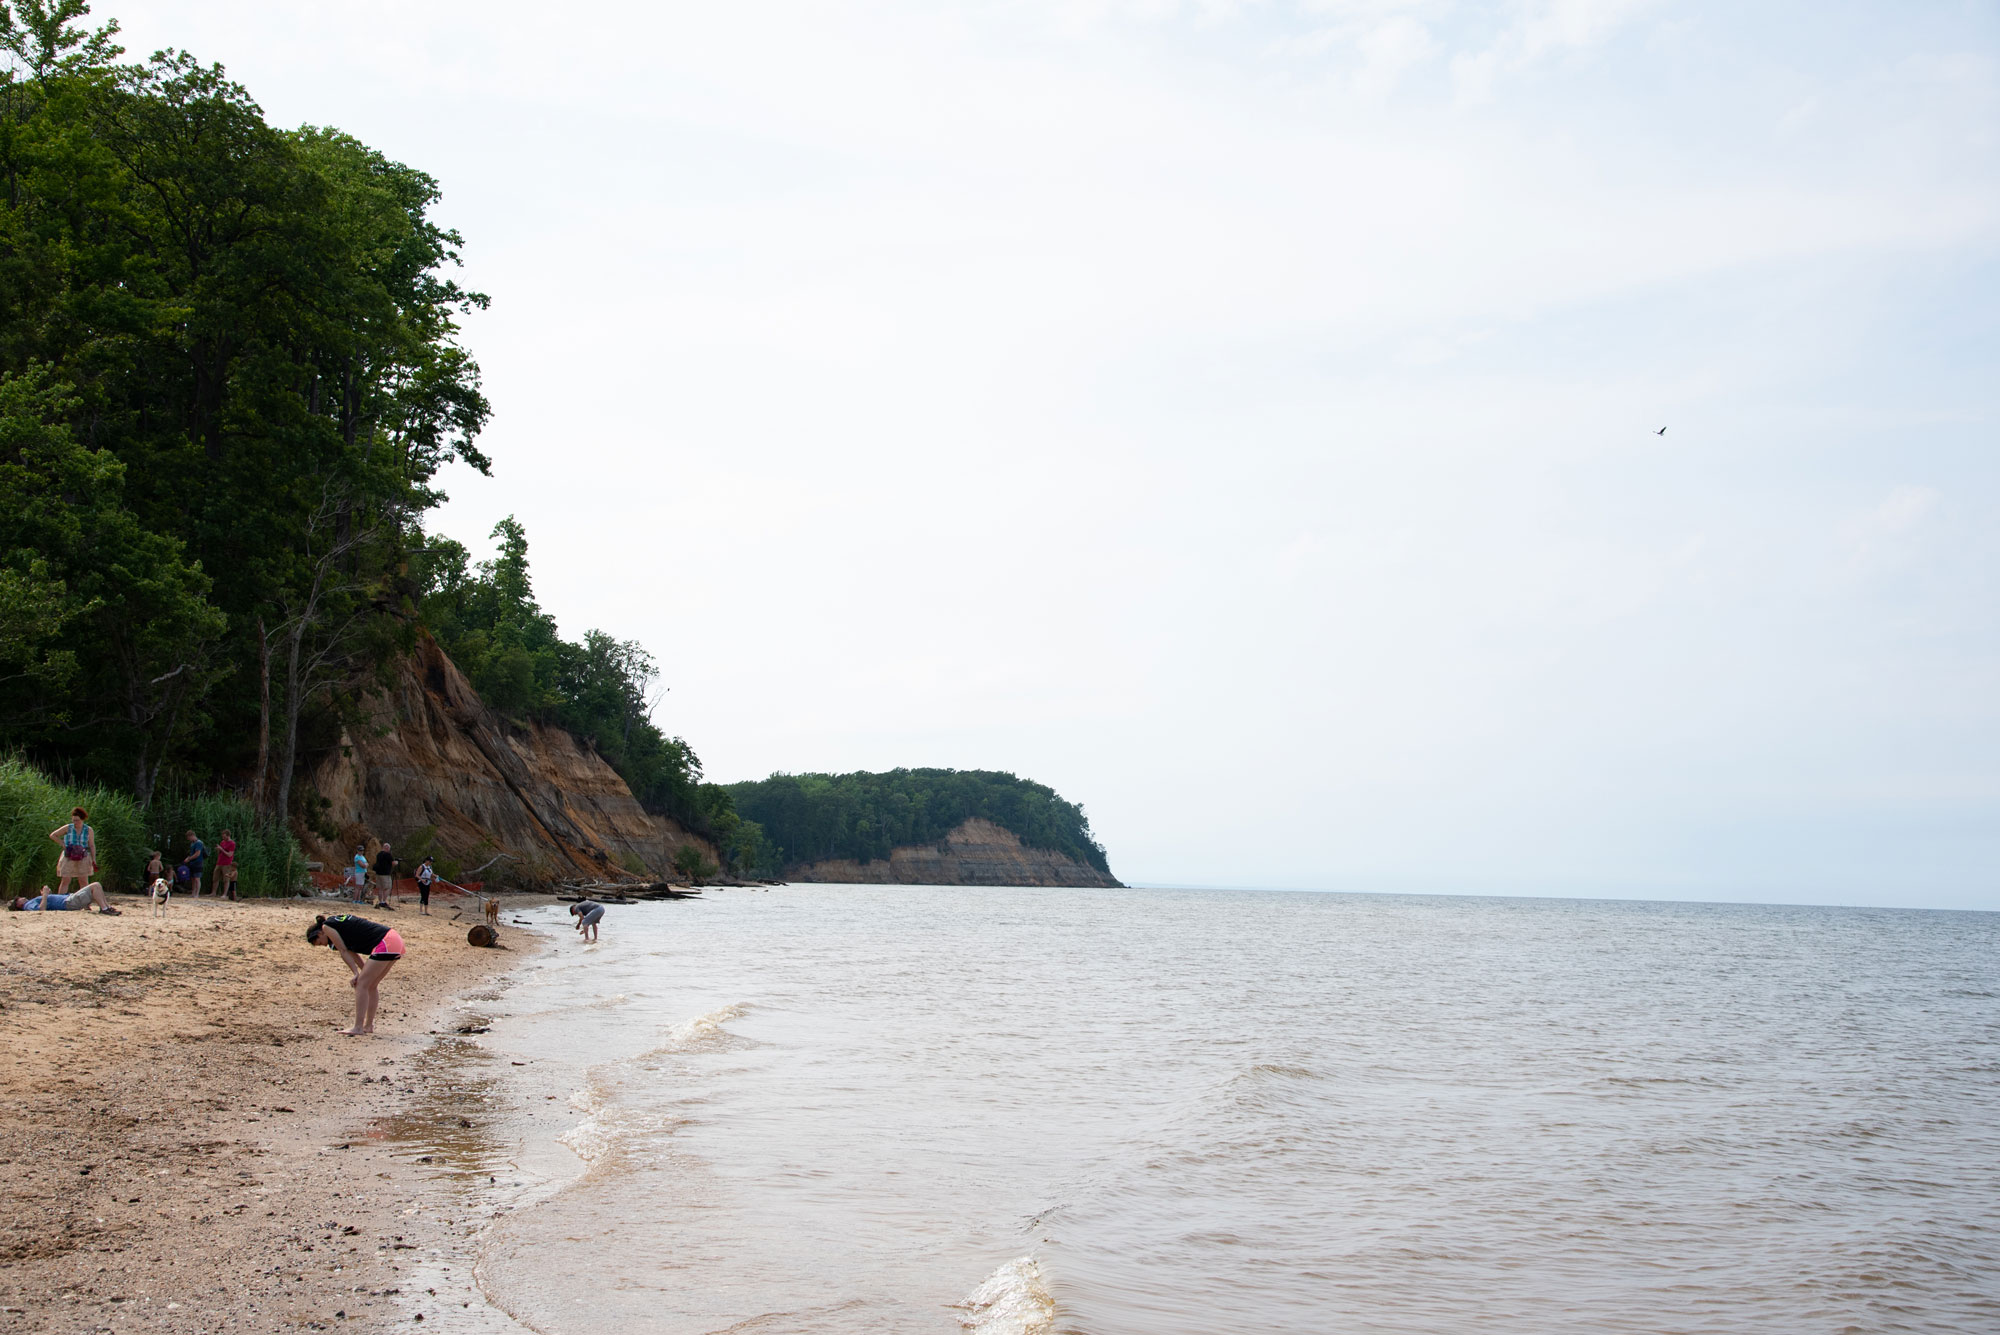 Photograph of Calvert Cliffs at Calvert Cliffs State Park in Maryland. The photo shows beachside cliffs with trees on top. People are hunting for fossils on the beach.